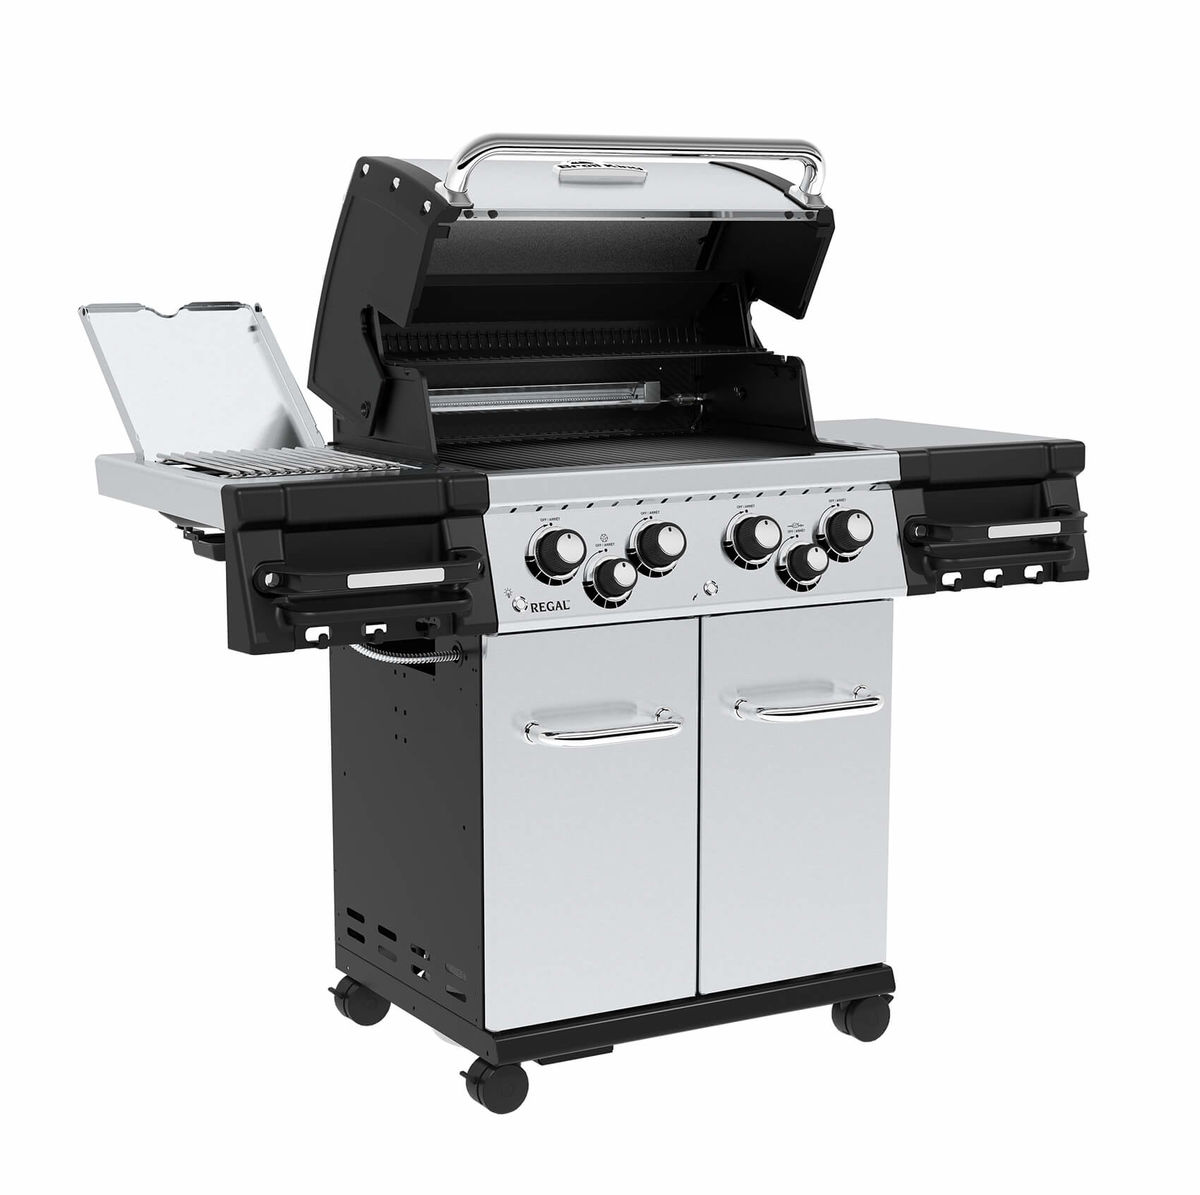 Image of Broil King Regal S 490 PRO IR Gasgrill bei nettoshop.ch